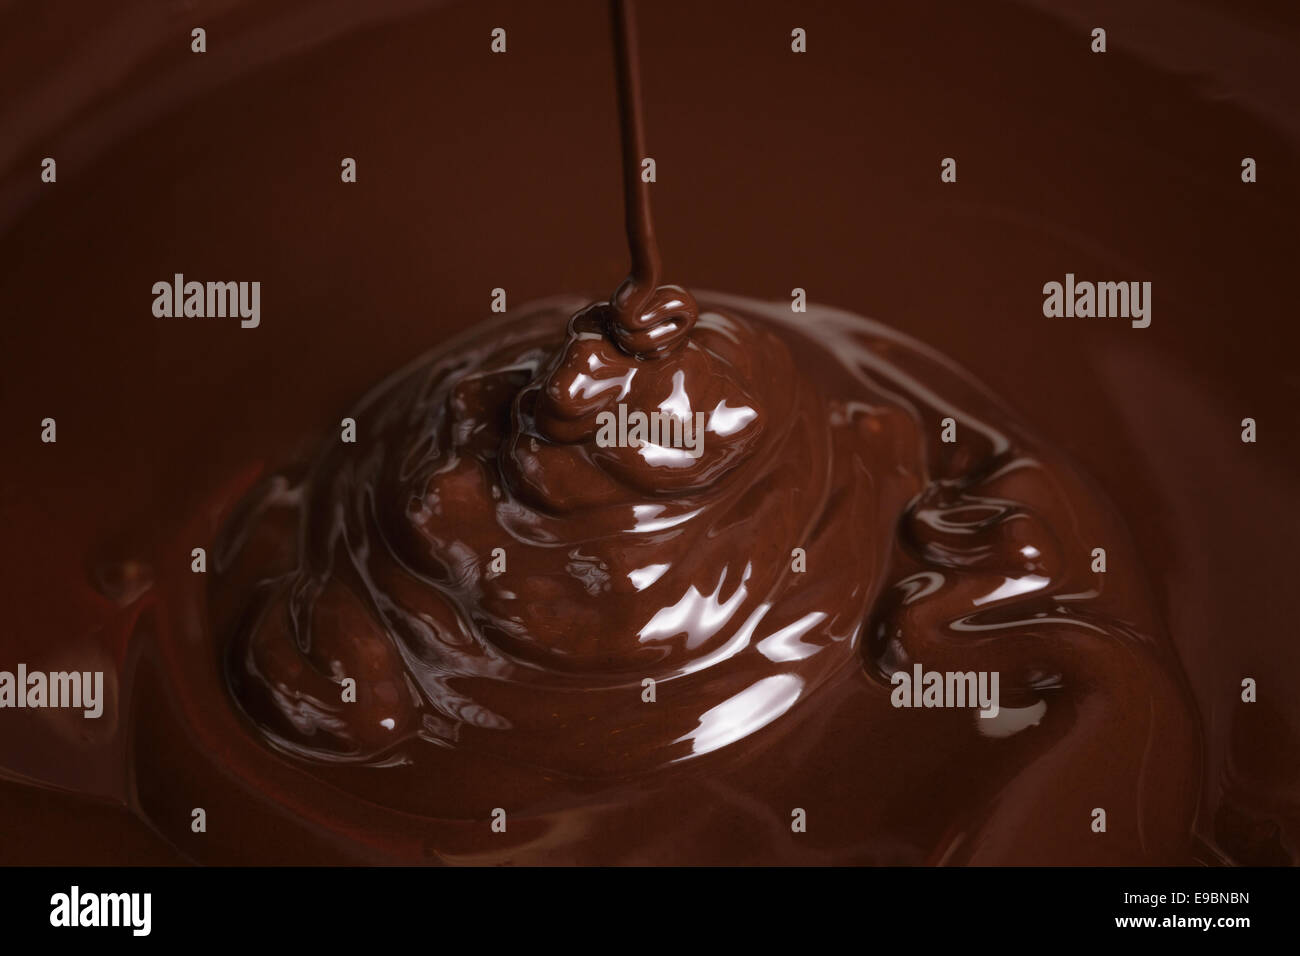 melted dark chocolate flow, candy or chocolate preparation background Stock Photo